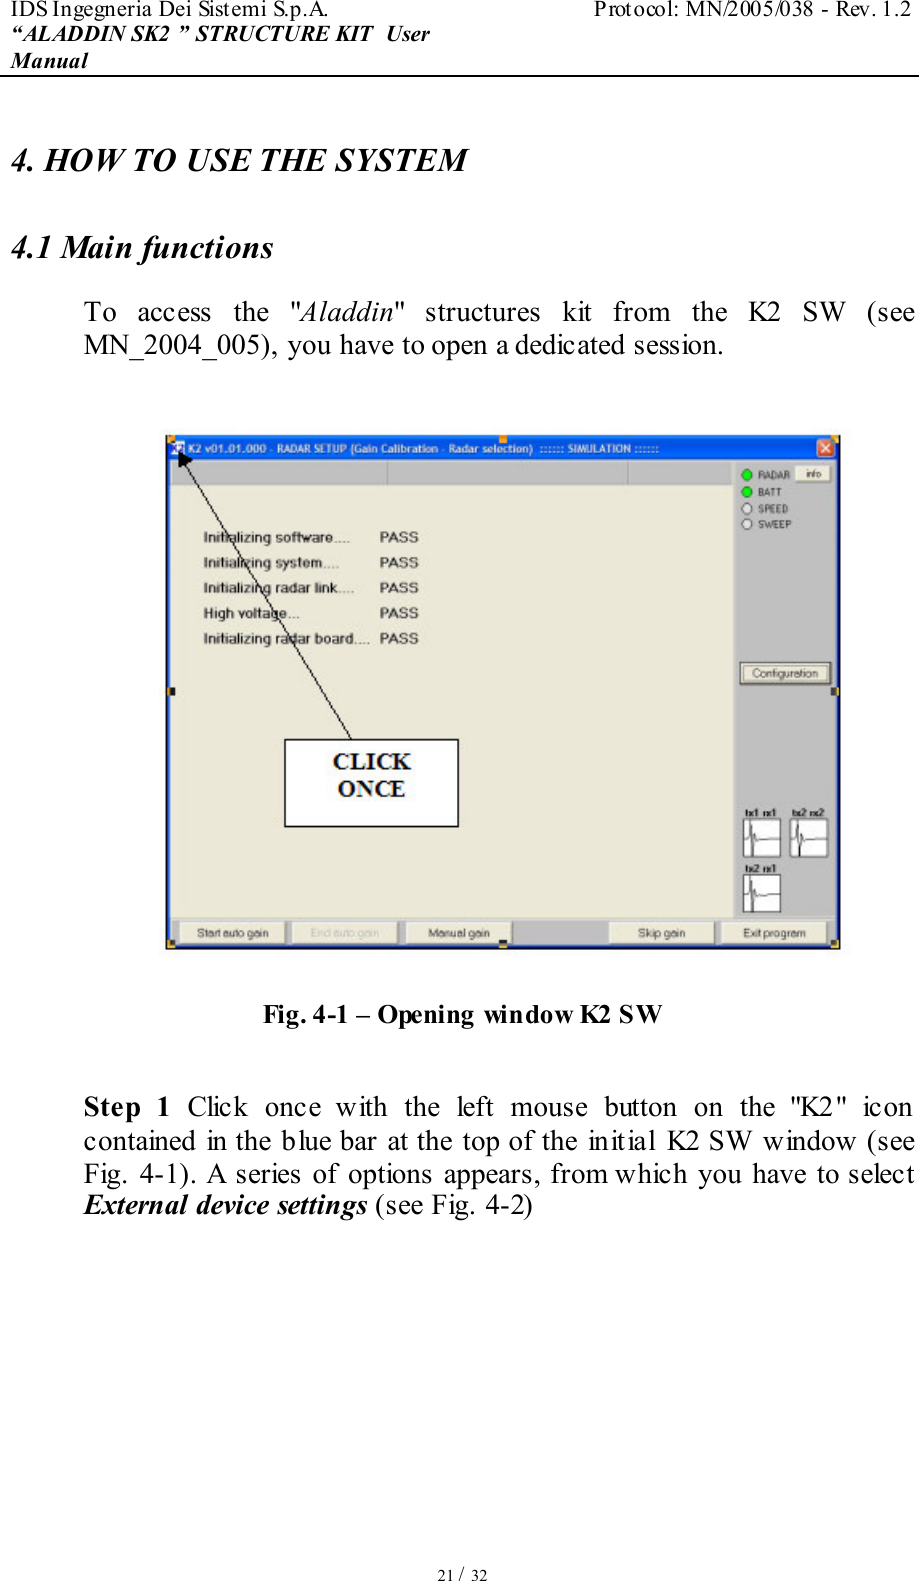 IDS Ingegneria Dei Sistemi S.p.A.  Protocol: MN/2005/038 - Rev. 1.2 “ALADDIN SK2 ” STRUCTURE KIT  User Manual   21 / 32 4. HOW TO USE THE SYSTEM 4.1 Main functions  To  access  the  &quot;Aladdin&quot;  structures  kit  from  the  K2  SW  (see MN_2004_005), you have to open a dedicated session.    Fig. 4-1 – Opening window K2 SW  Step  1  Click  once  with  the  left  mouse  button  on  the  &quot;K2&quot;  icon contained in the blue bar at the top of the initial K2 SW window (see Fig.  4-1).  A  series  of  options  appears, from which  you  have  to select External device settings (see Fig. 4-2)   